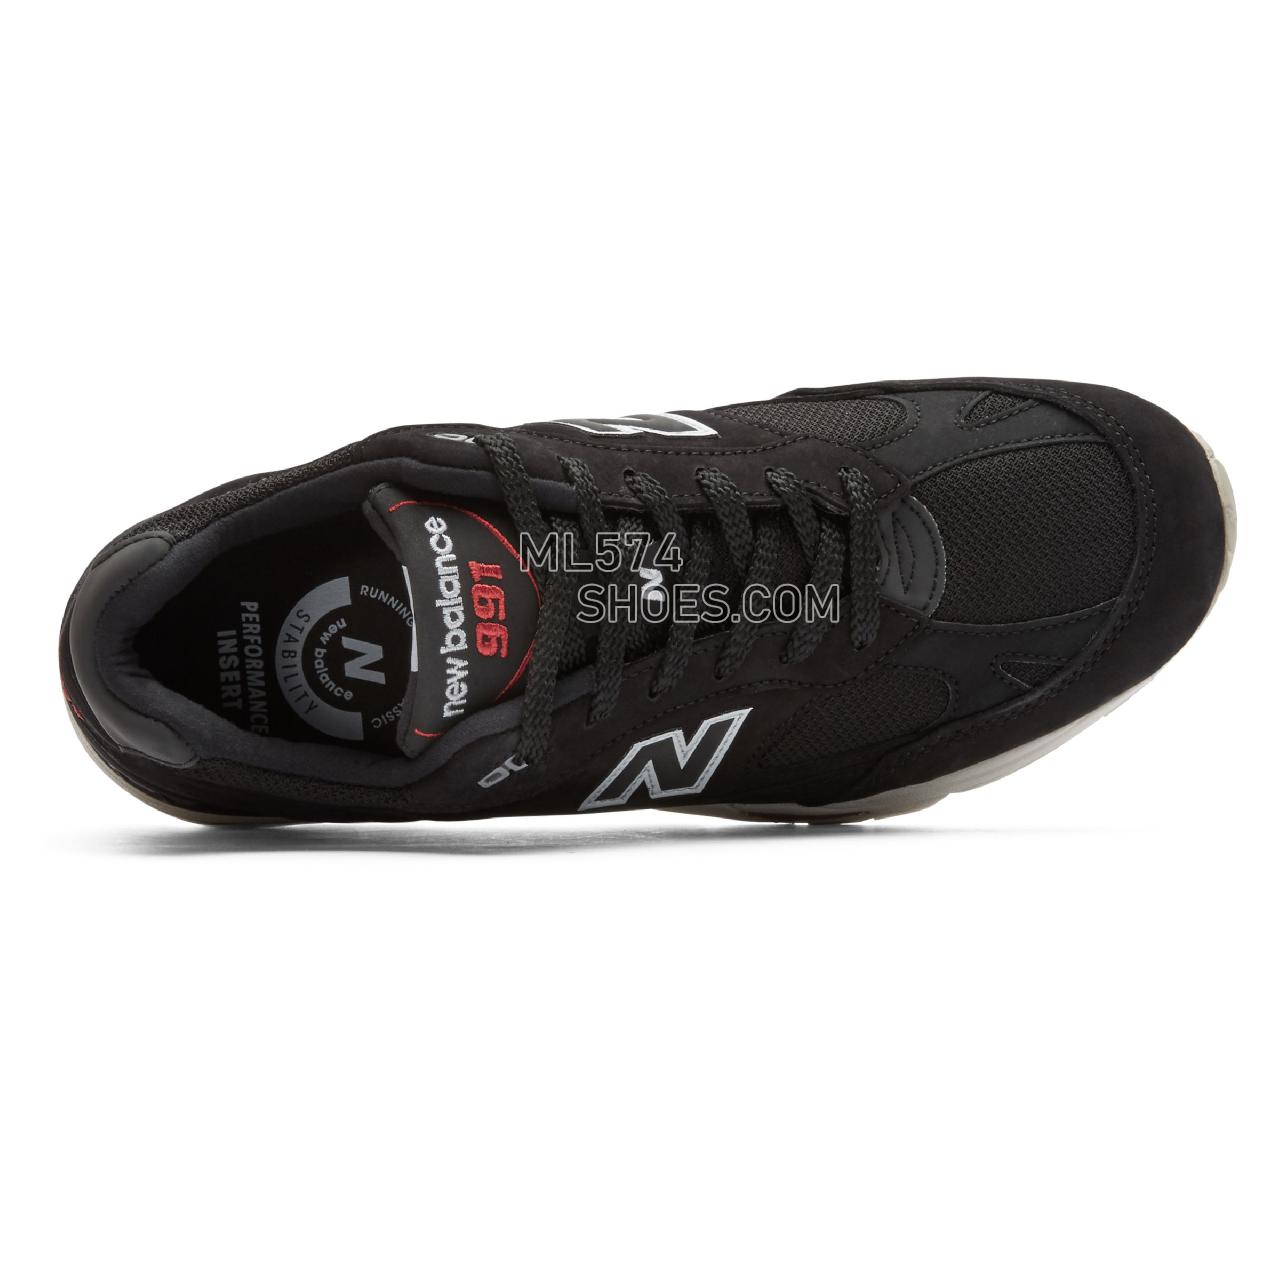 New Balance Made in UK 991 - Men's Made in UK 991 Classic - Black with Red and Grey - M991NKR